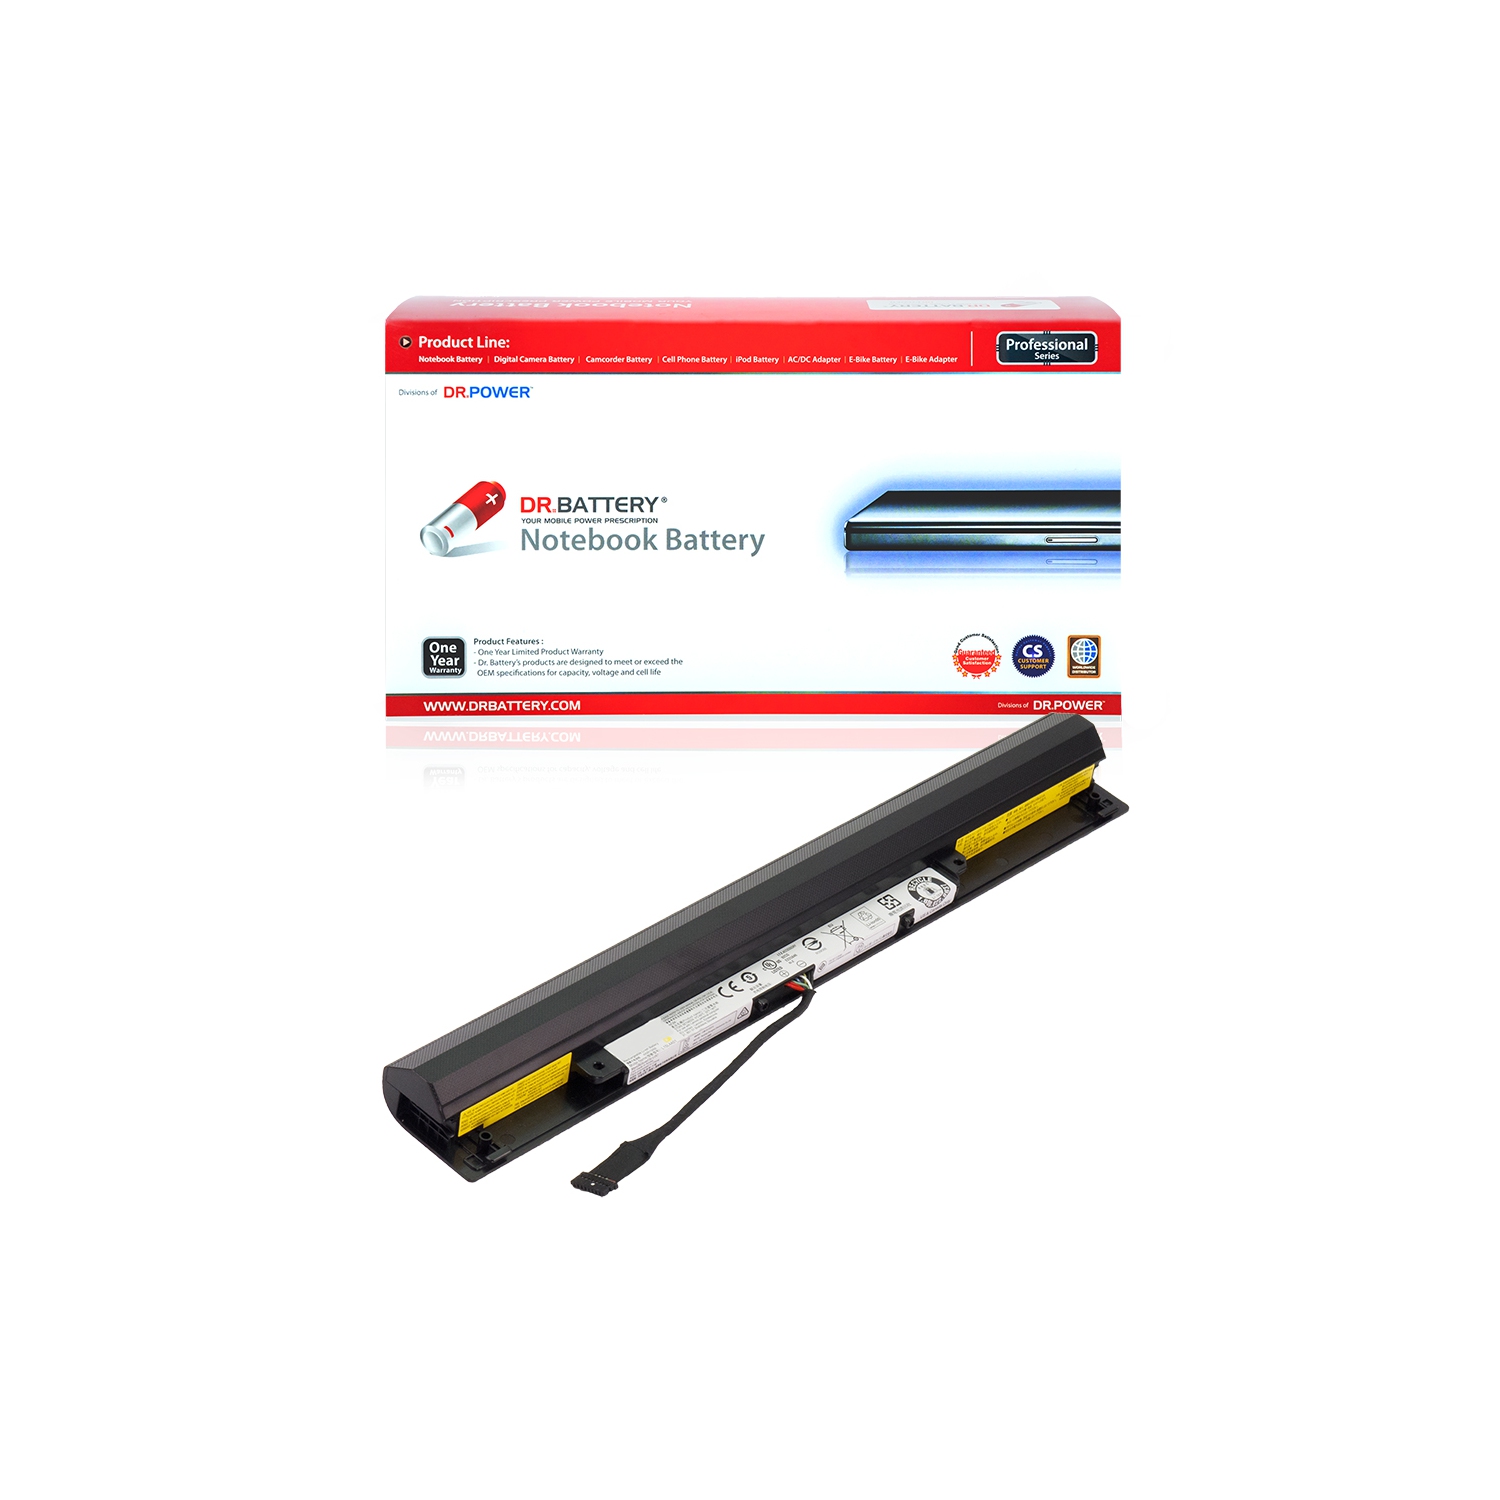 DR. BATTERY - Replacement for Lenovo IdeaPad 100-15IBD 80QQ00GCGE / 100-15IBD 80QQ00KBGE / 65 / L15L4A01 / L15S4A01 / 41NR19